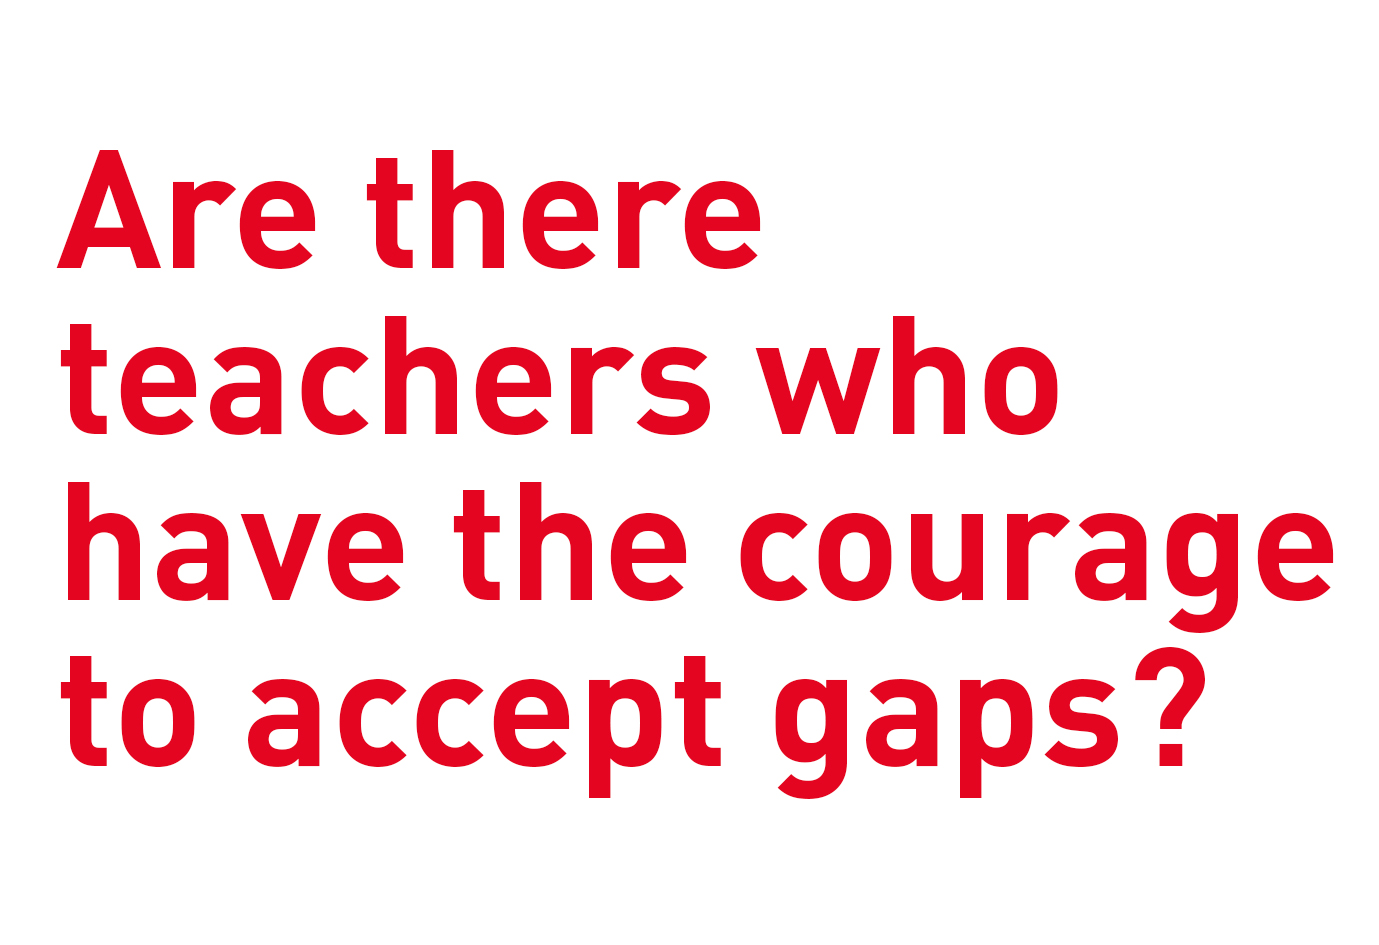 Are there teachers who have the courage to accept gaps? - Lipschule